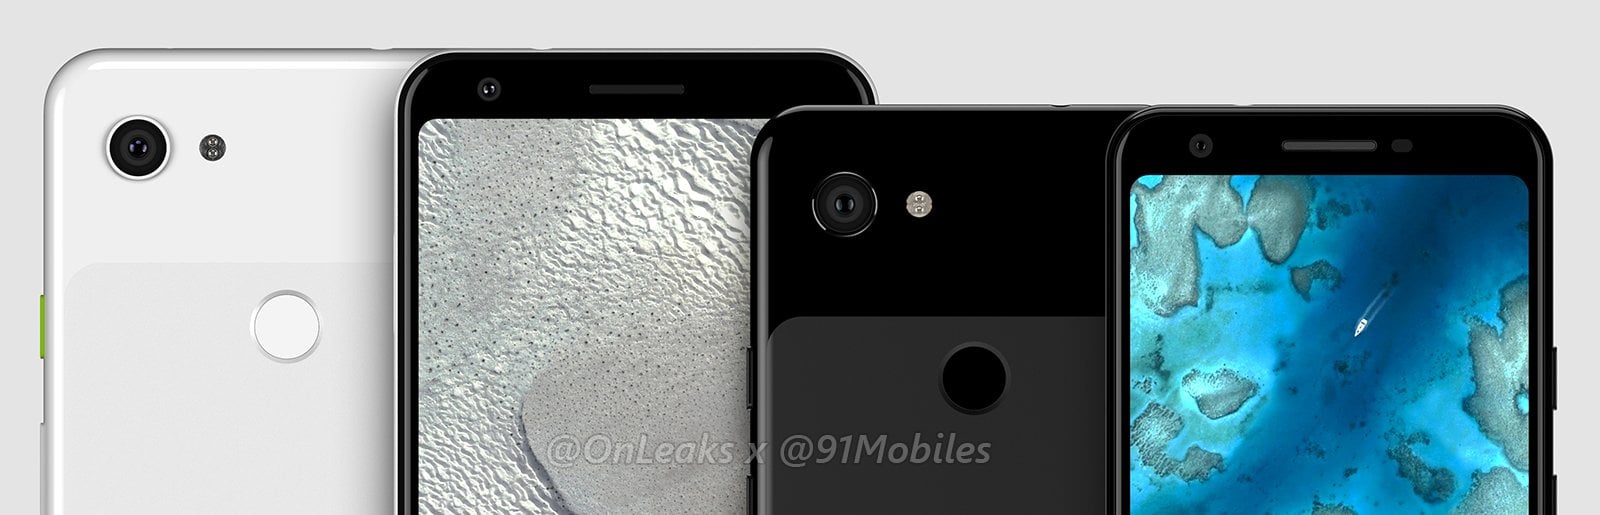 High quality renders of Pixel 3 Lite and Pixel 3 Lite XL show no notch design with thick bezels